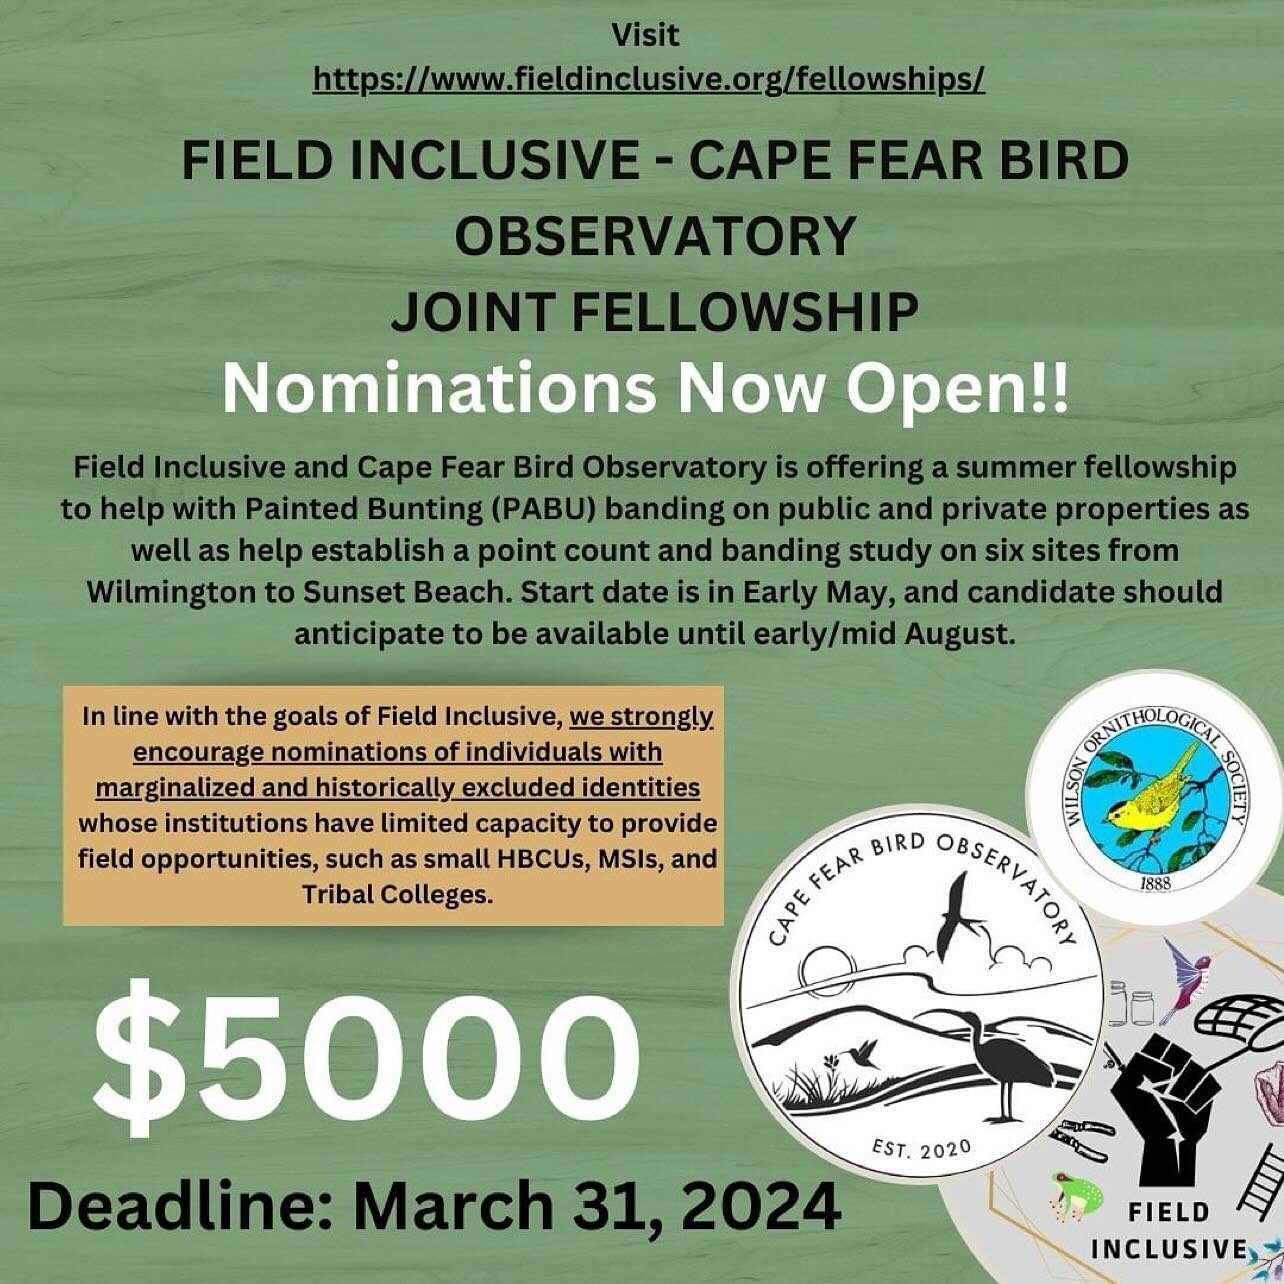 Repost from @fieldinclusive
&bull;
Nominations Now Open.
Field Inclusive and Cape Fear Bird Observatory are offering a summer fellowship in the amount of $5,000 (paid over three months as a monthly stipend) to help with Painted Bunting (PABU) banding